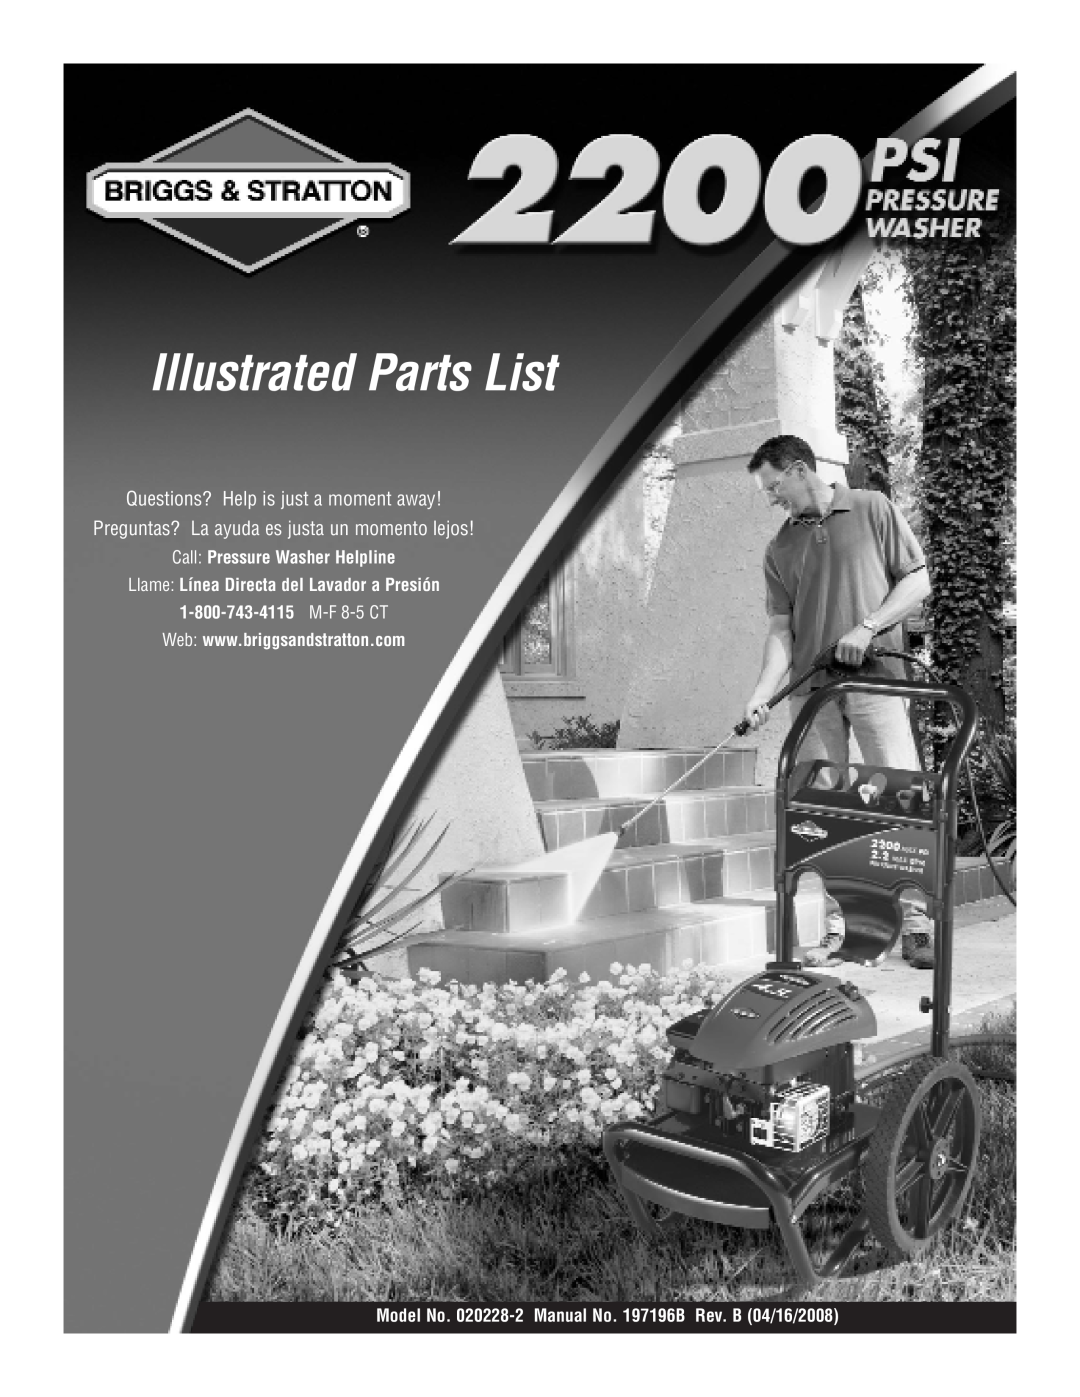 Briggs & Stratton 020228-2 manual Illustrated Parts List, Questions? Help is just a moment away 